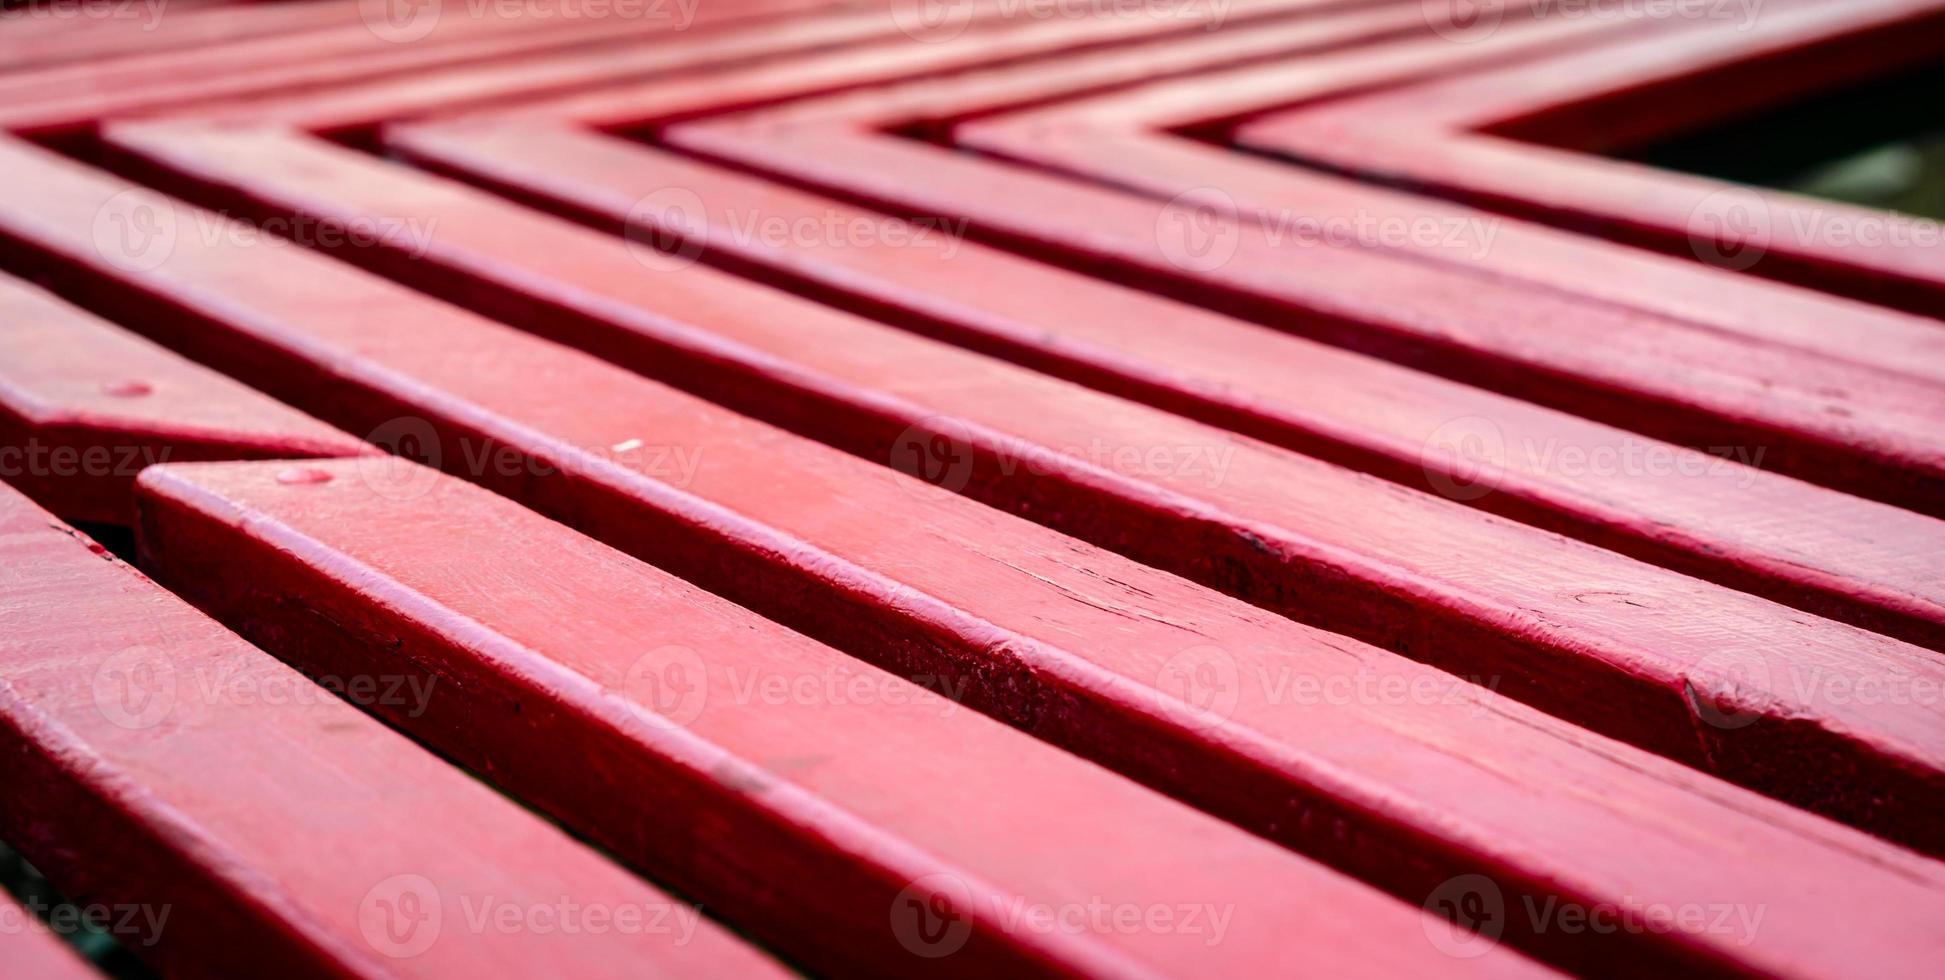 texture wooden boards painted red paint close-up photo